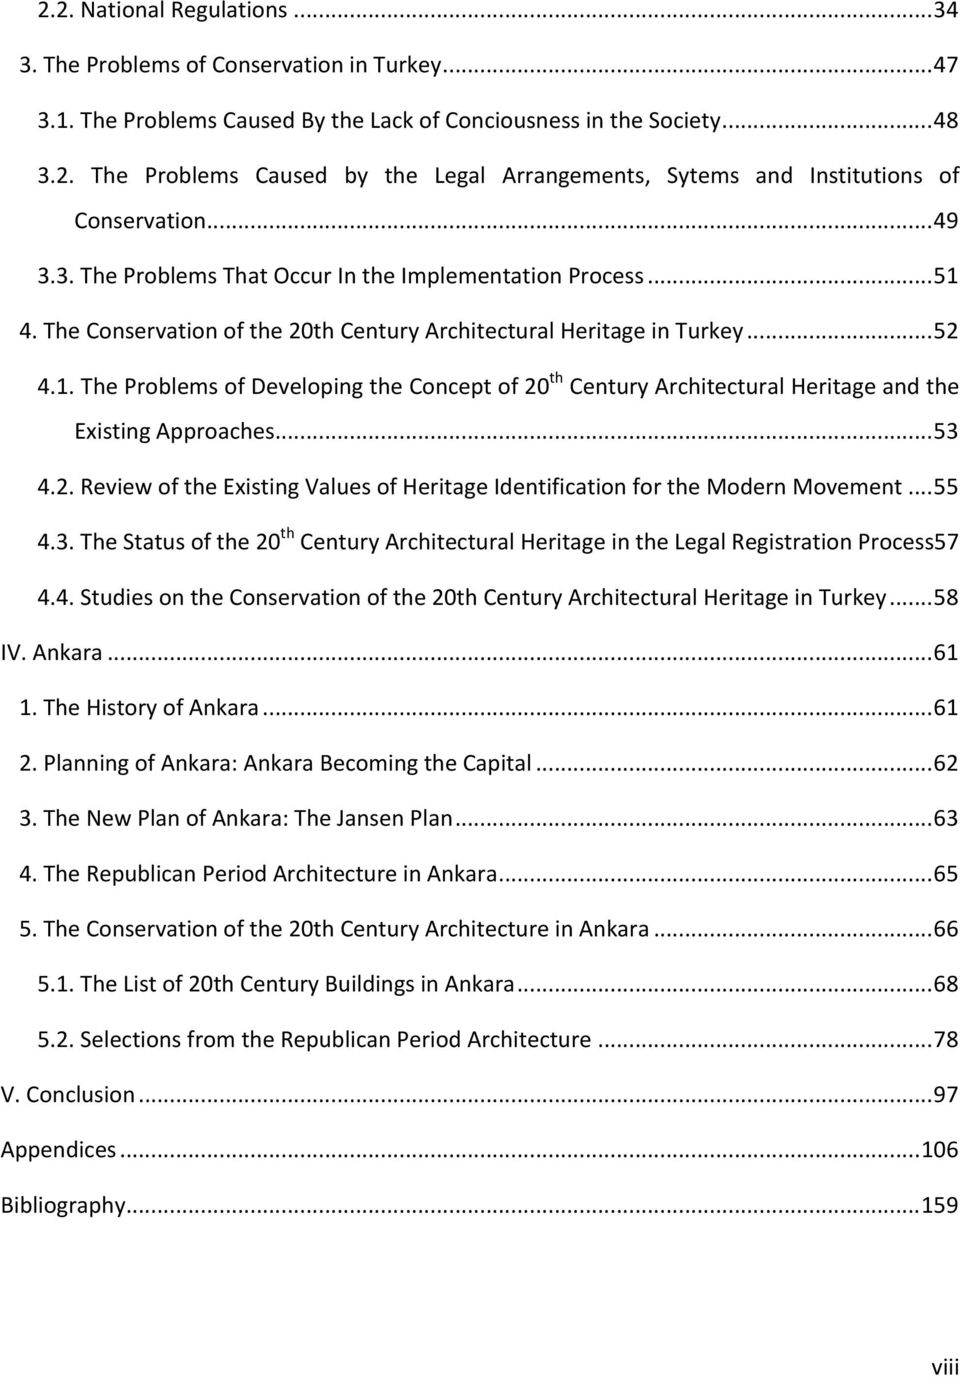 ..53 4.2. Review of the Existing Values of Heritage Identification for the Modern Movement...55 4.3. The Status of the 20 th Century Architectural Heritage in the Legal Registration Process57 4.4. Studies on the Conservation of the 20th Century Architectural Heritage in Turkey.